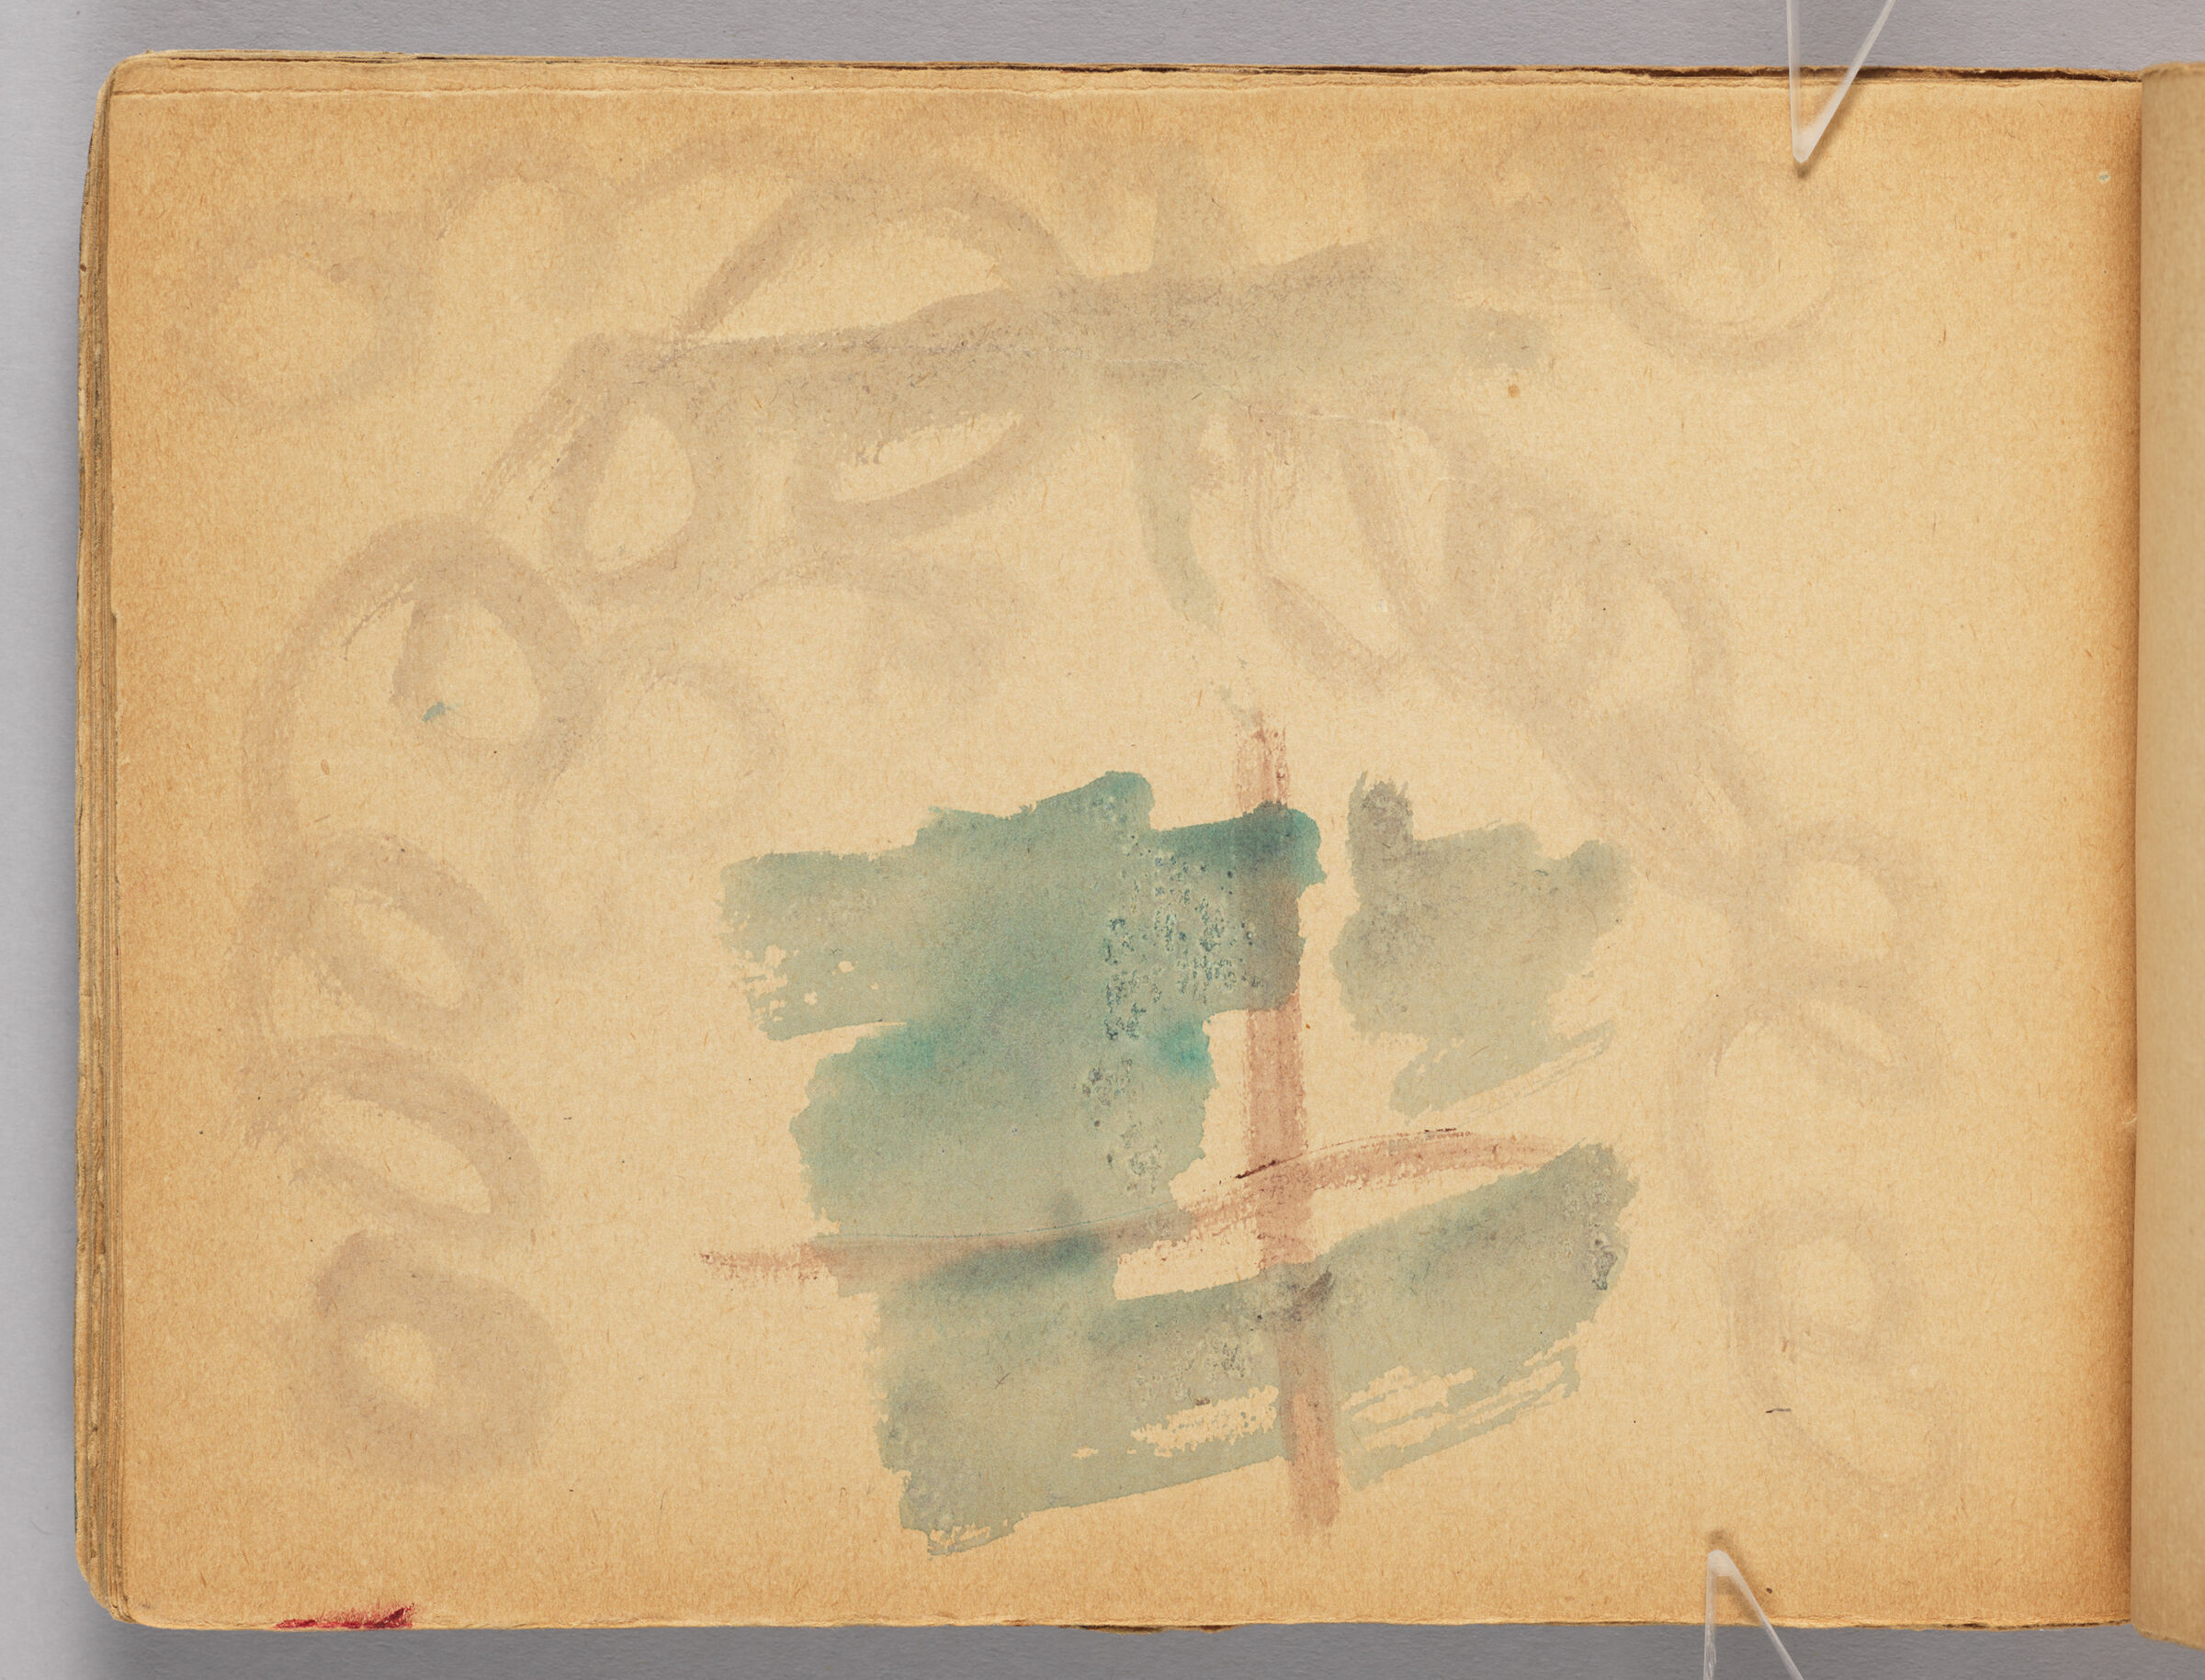 Untitled (Watercolor Sketch, Left Page); Untitled (Watercolor Transfer, Right Page)